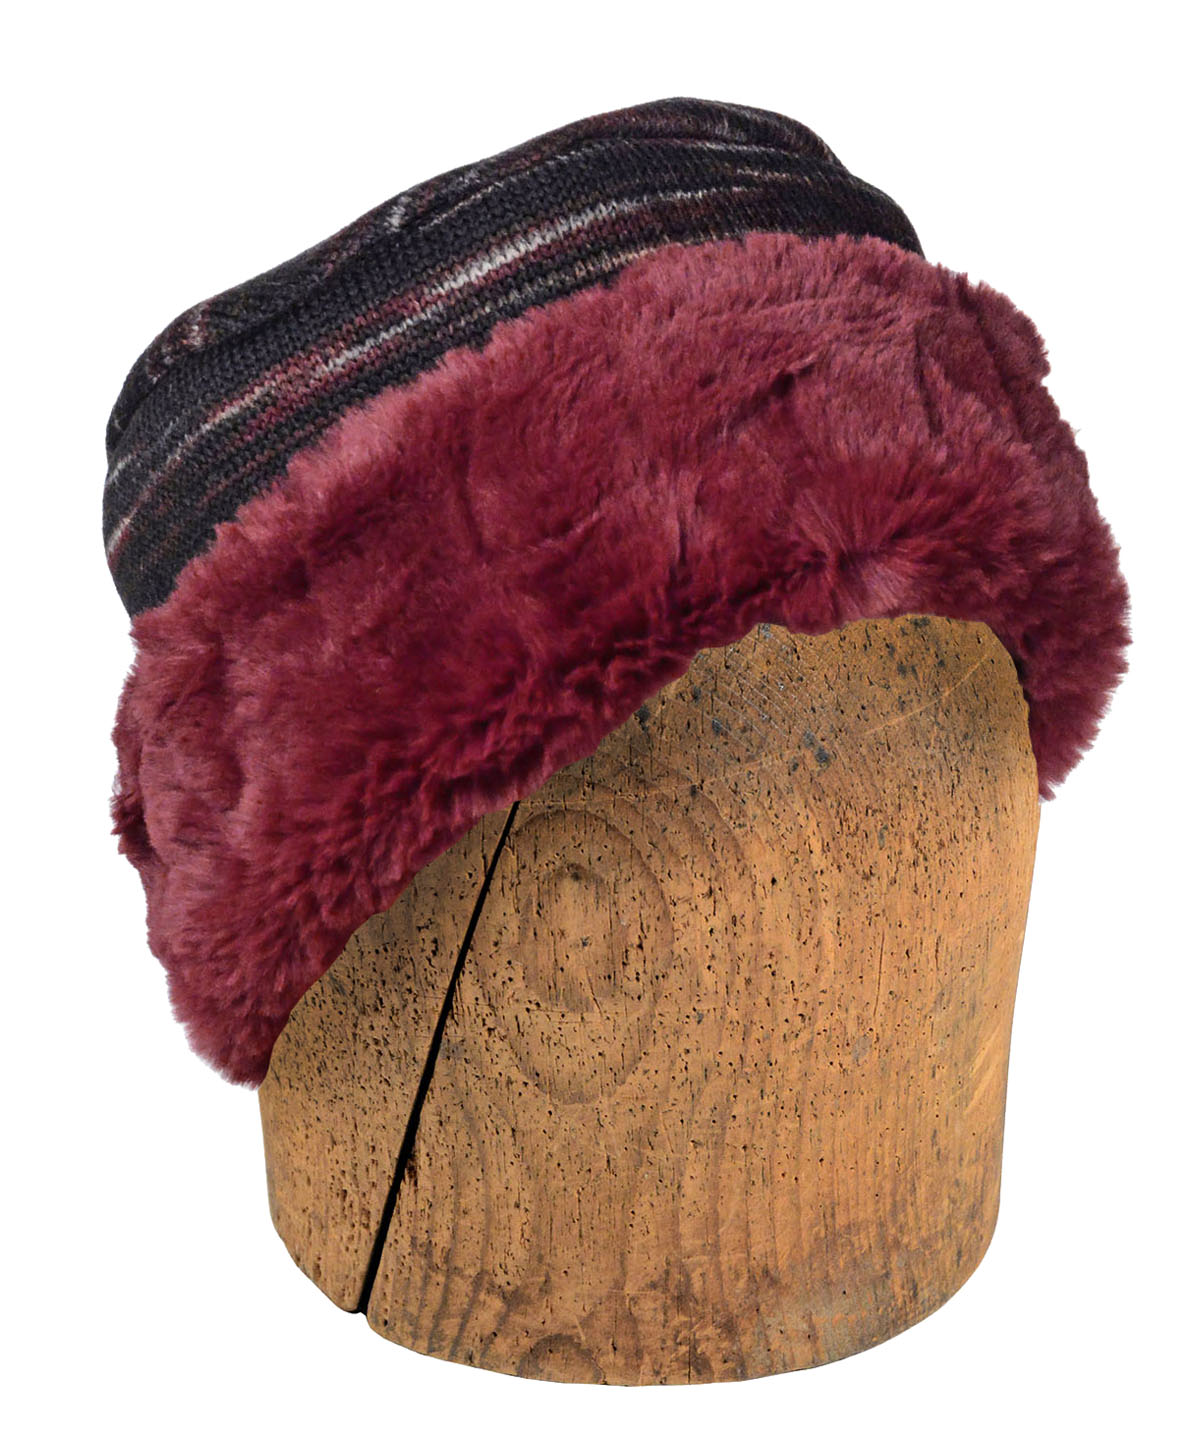 Men's 2-tone Cuffed Pillbox | Sweet Stripes in Cherry Cordial Knit Fabric with CUddly Black Faux Fur | By Pandemonium Millinery| Handmade in Seattle WA